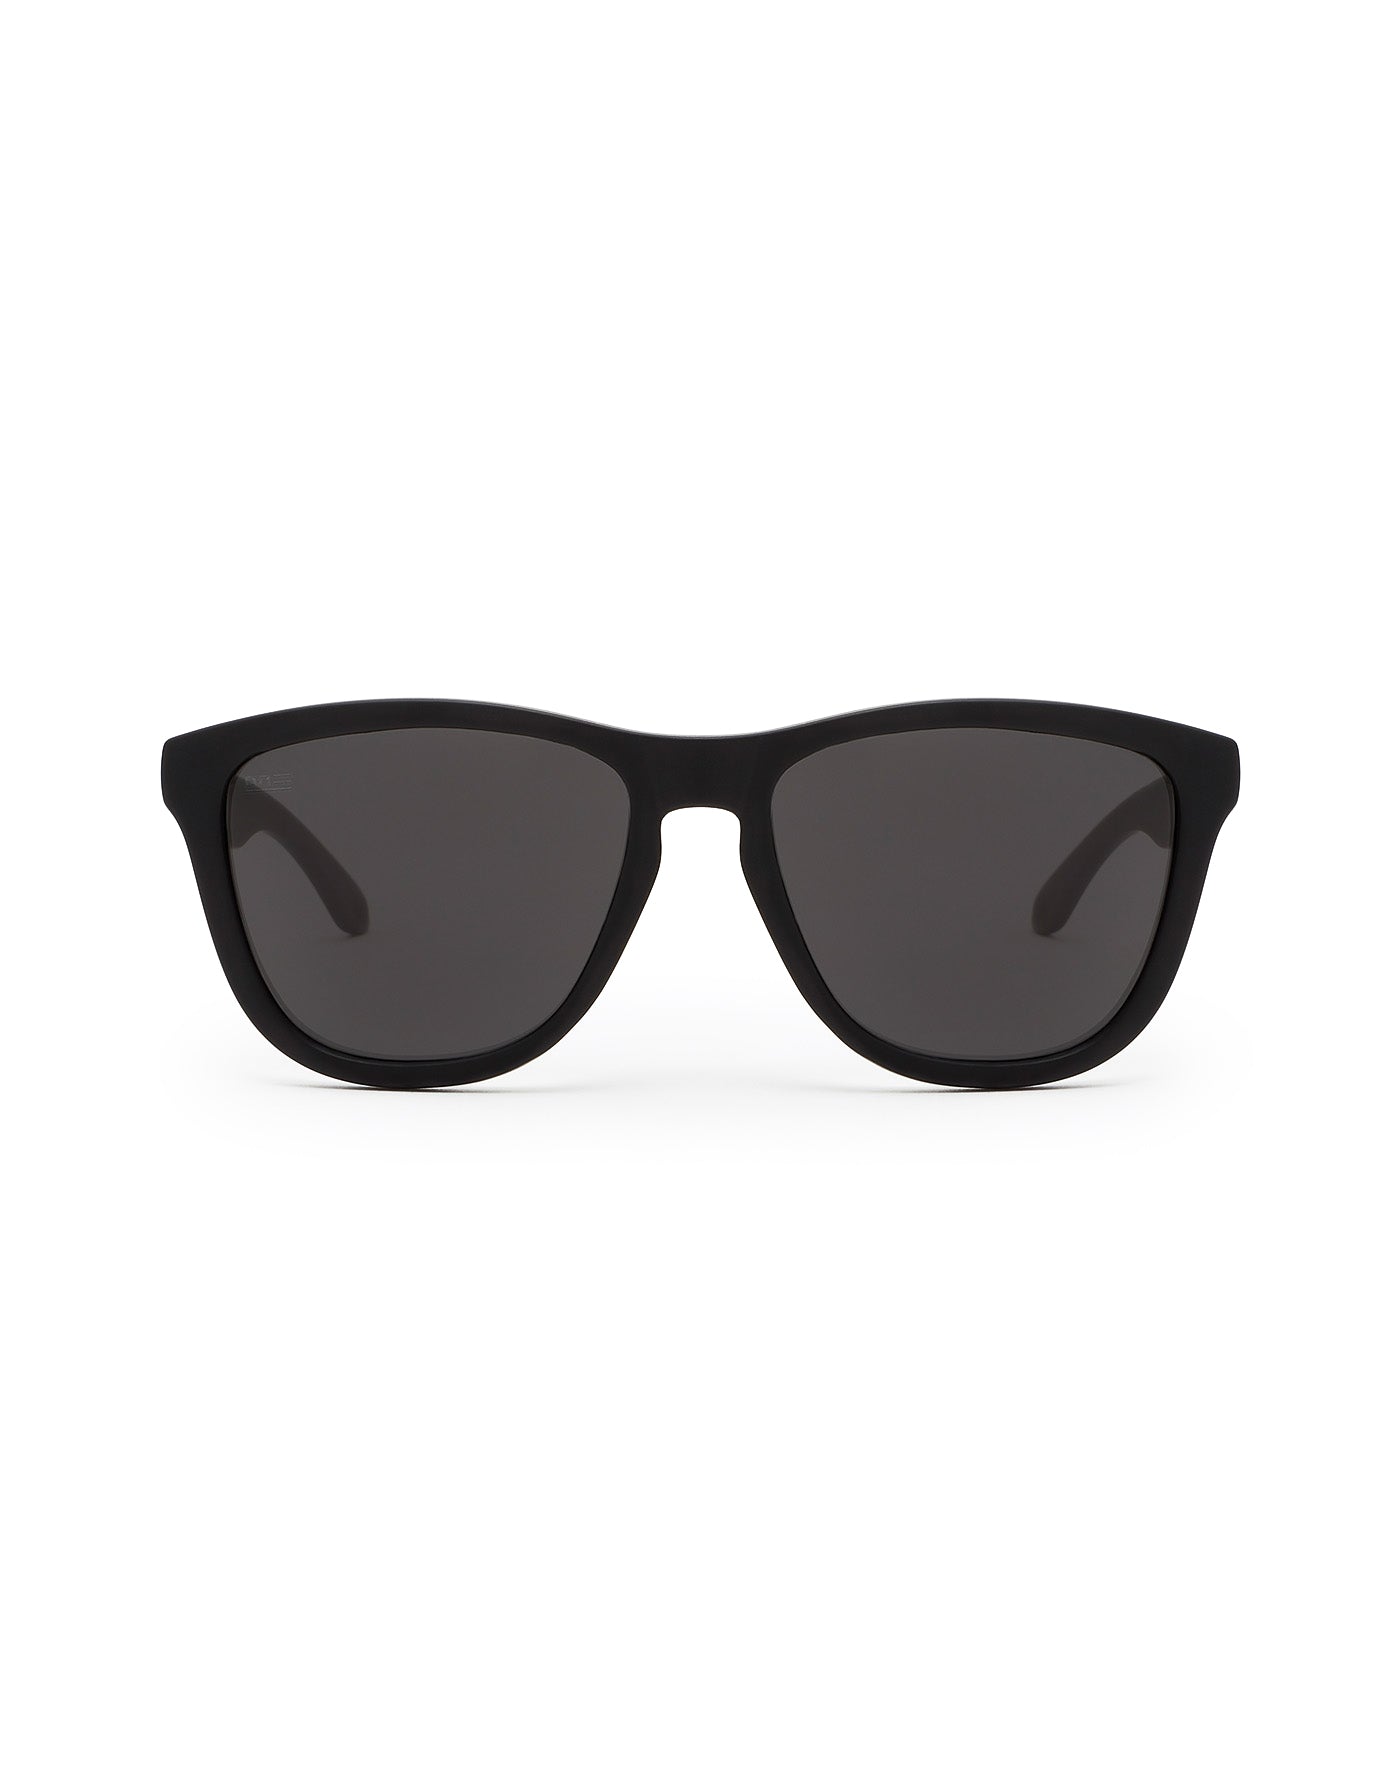 HAWKERS - ONE POLARIZED Carbon Black Dark For Men and Women UV400